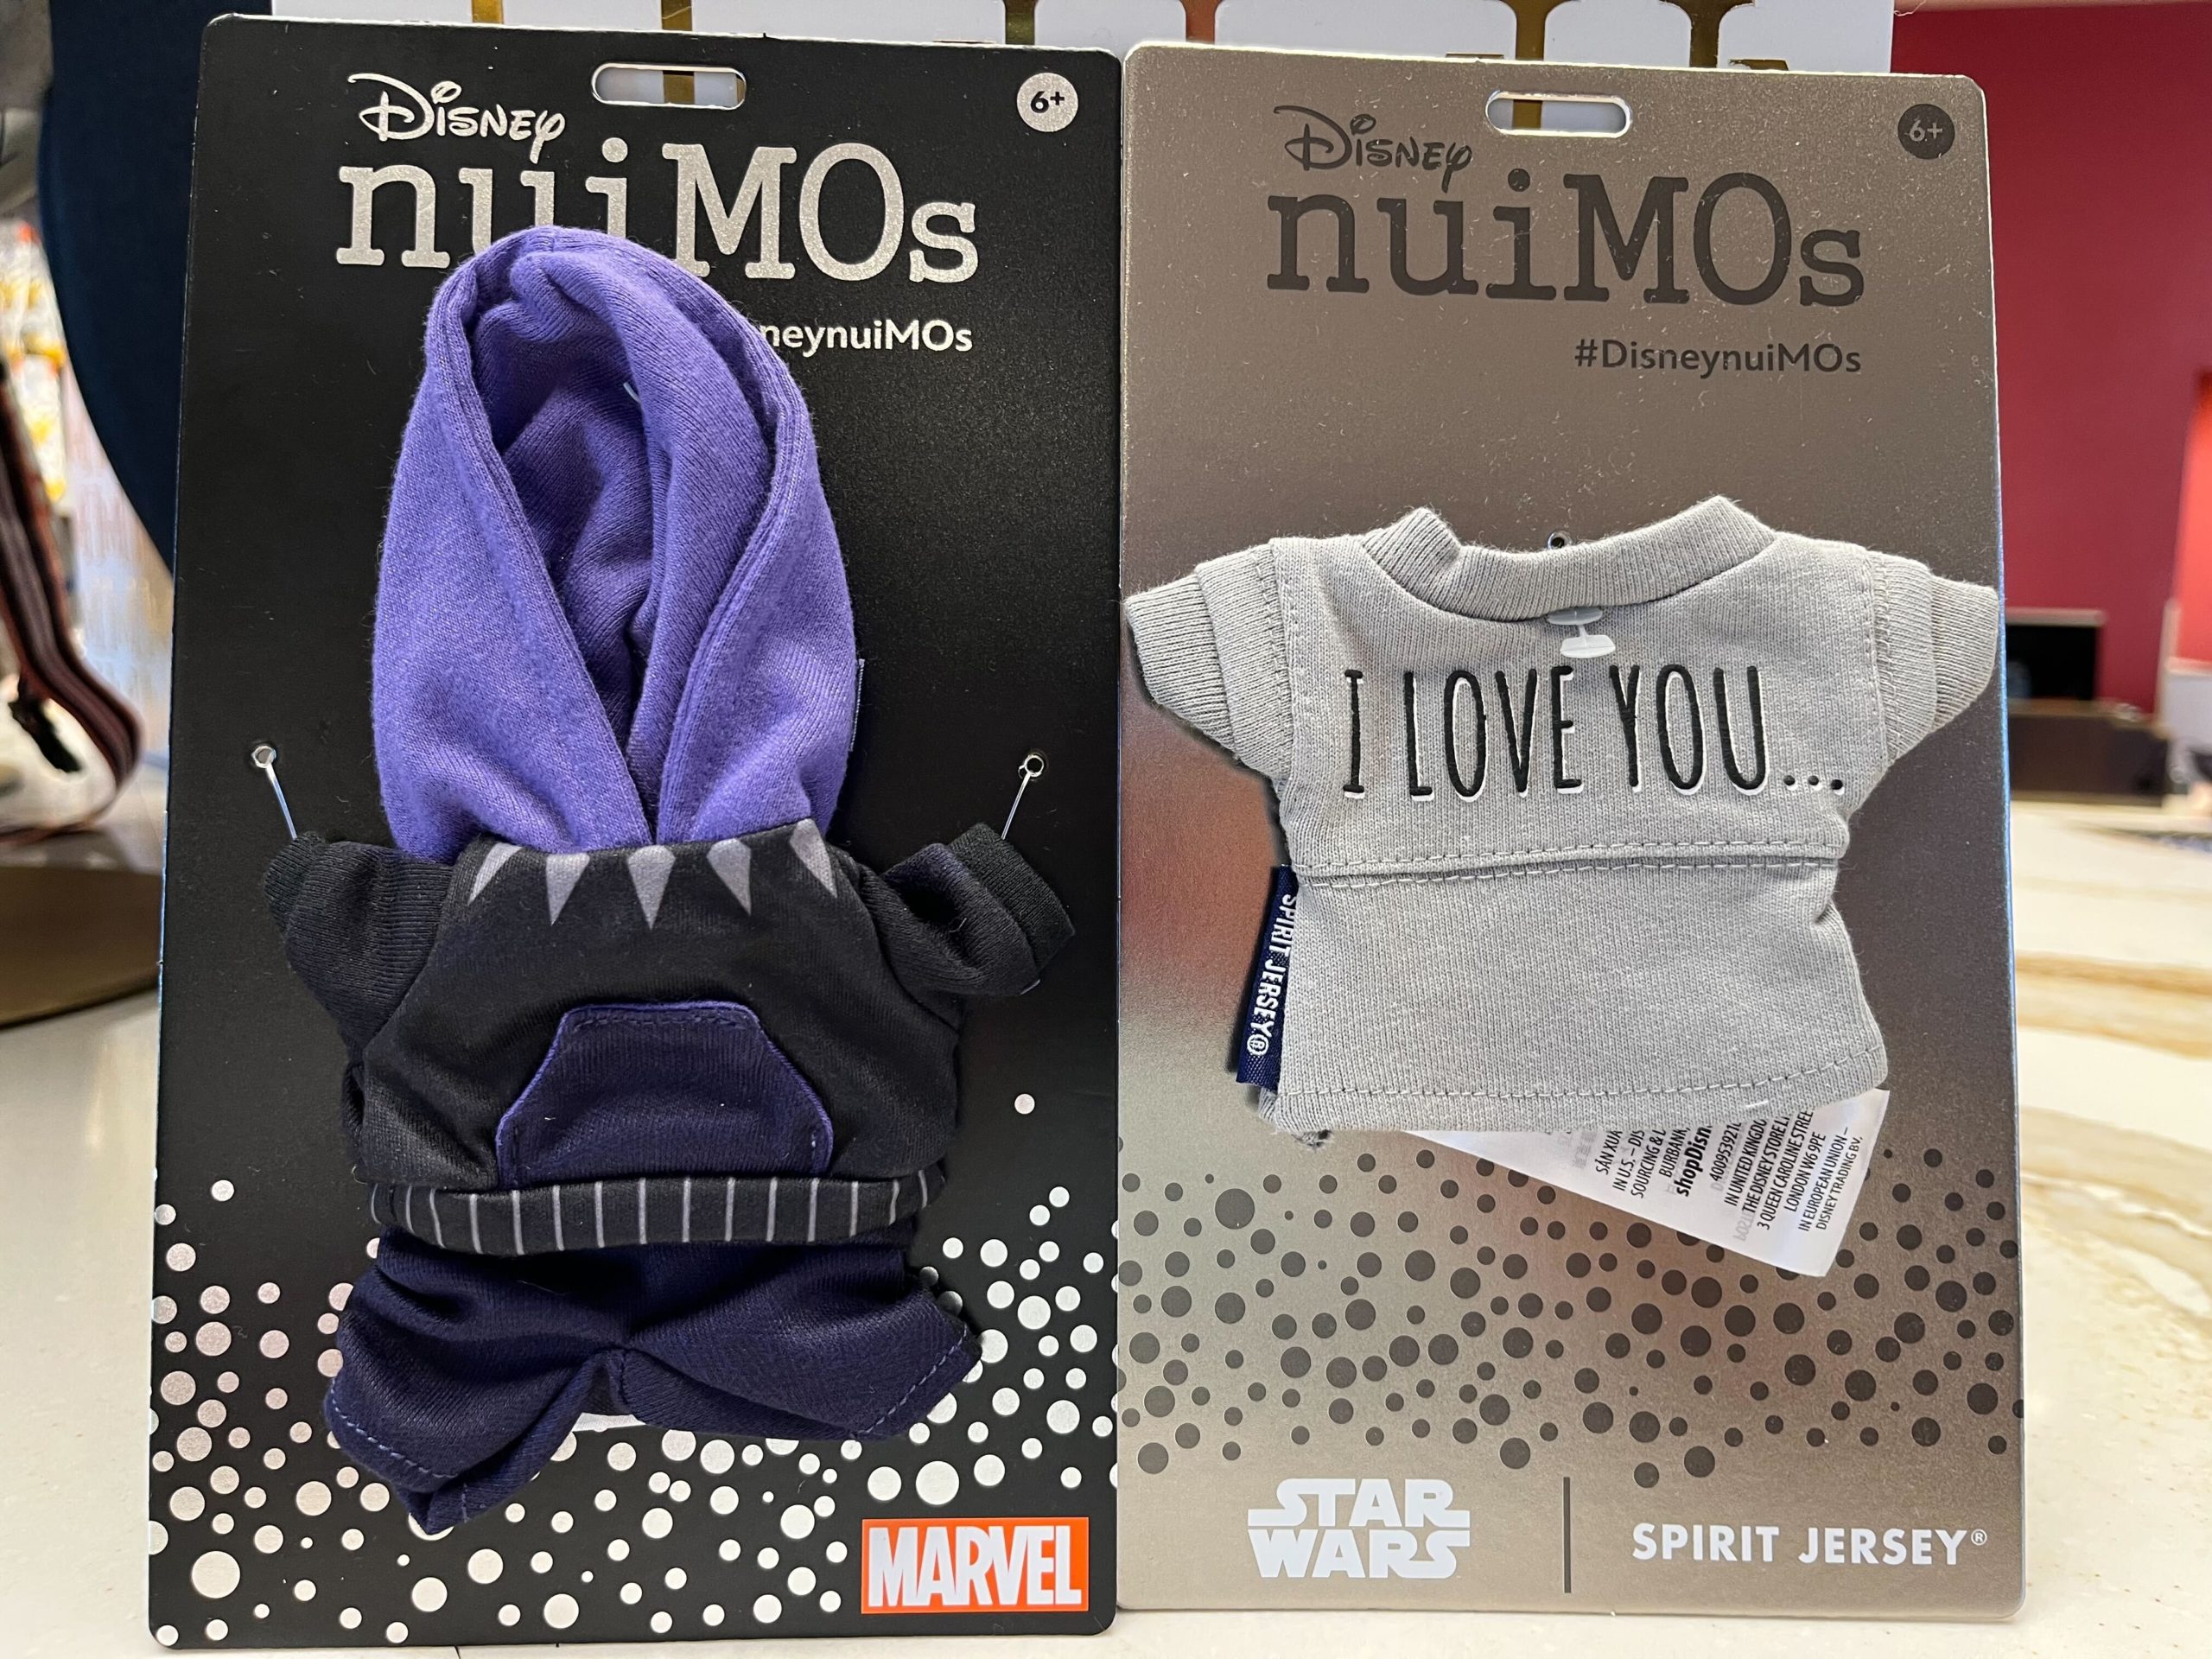 Star Wars, Marvel, and More Celebrated in New Disney nuiMOs